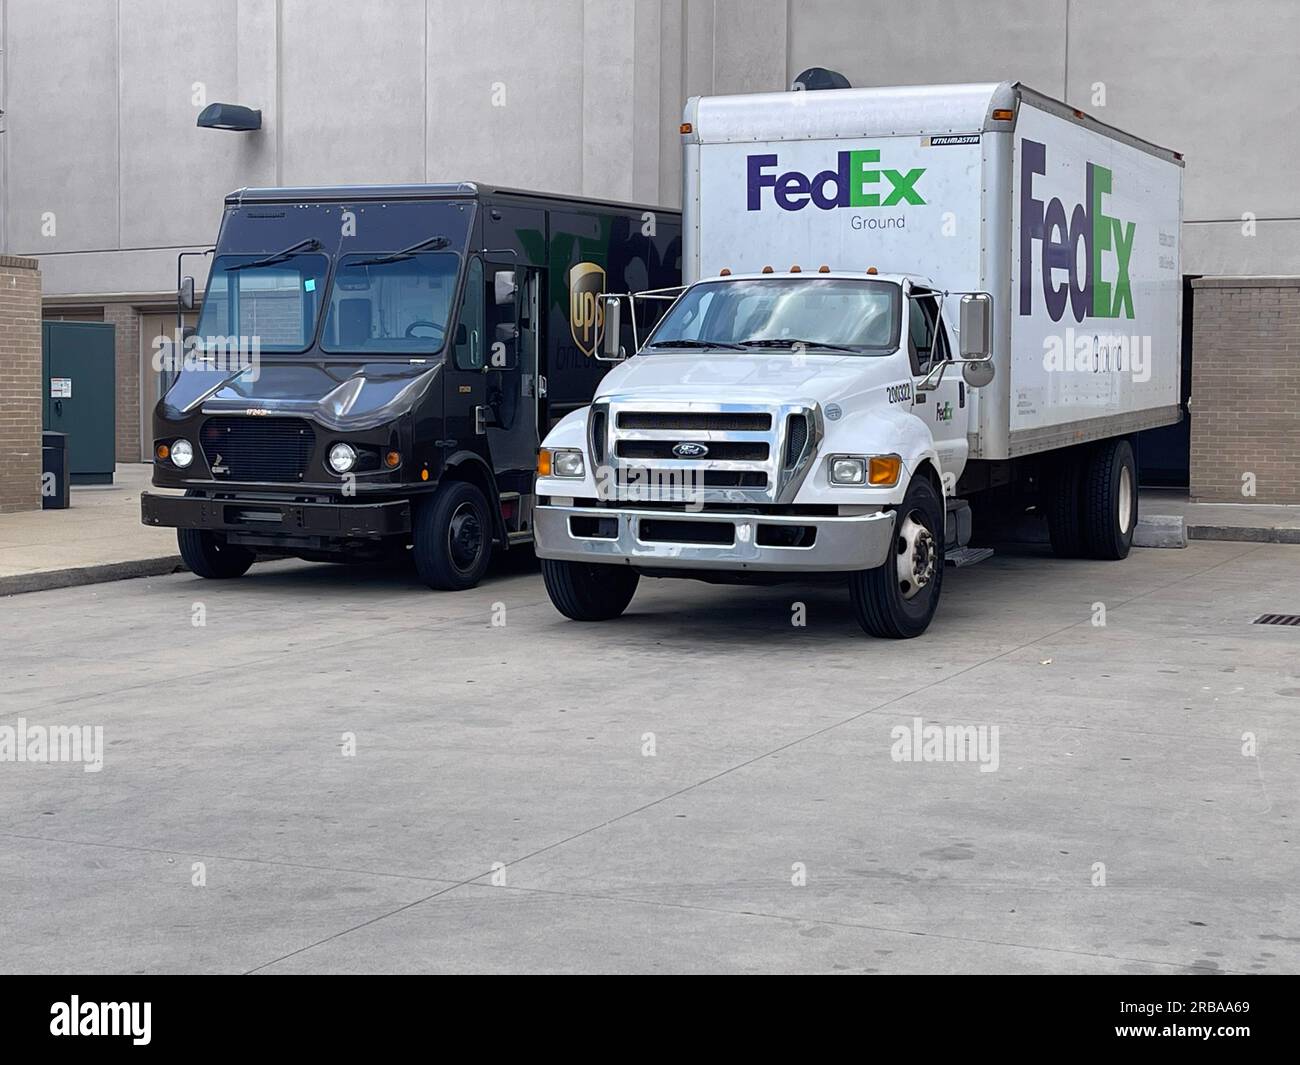 Buford, GA / USA - May 30, 2023:  A UPS truck is parked beside a FedEx truck at the loading dock of a shopping mall, on May 30, 2023 in Buford, GA. Stock Photo